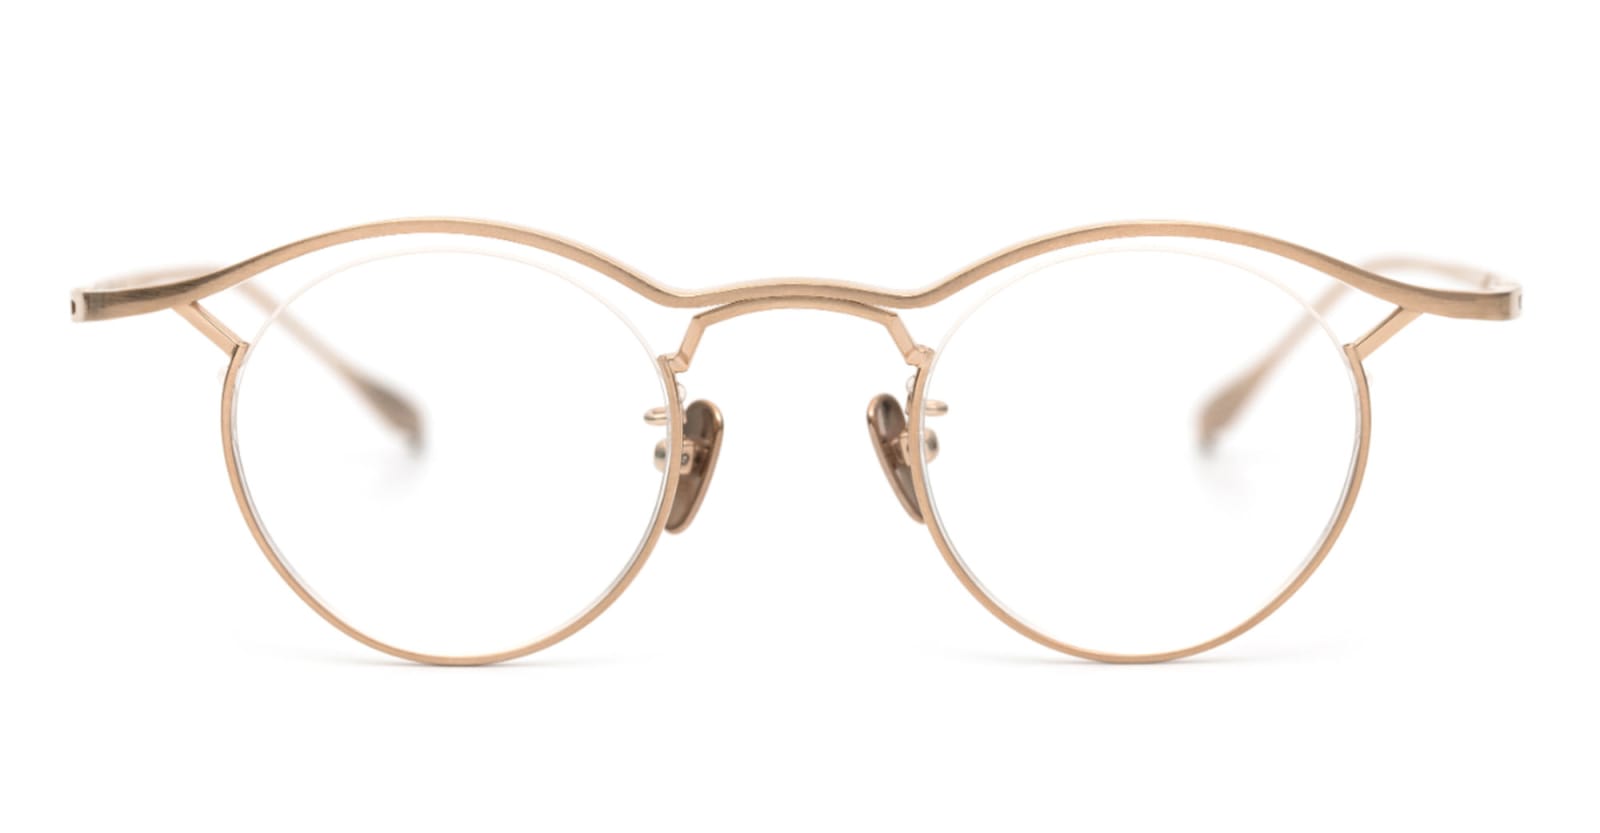 FACTORY900 Titanos X Factory900 Mf-001 - Gold Rx Glasses